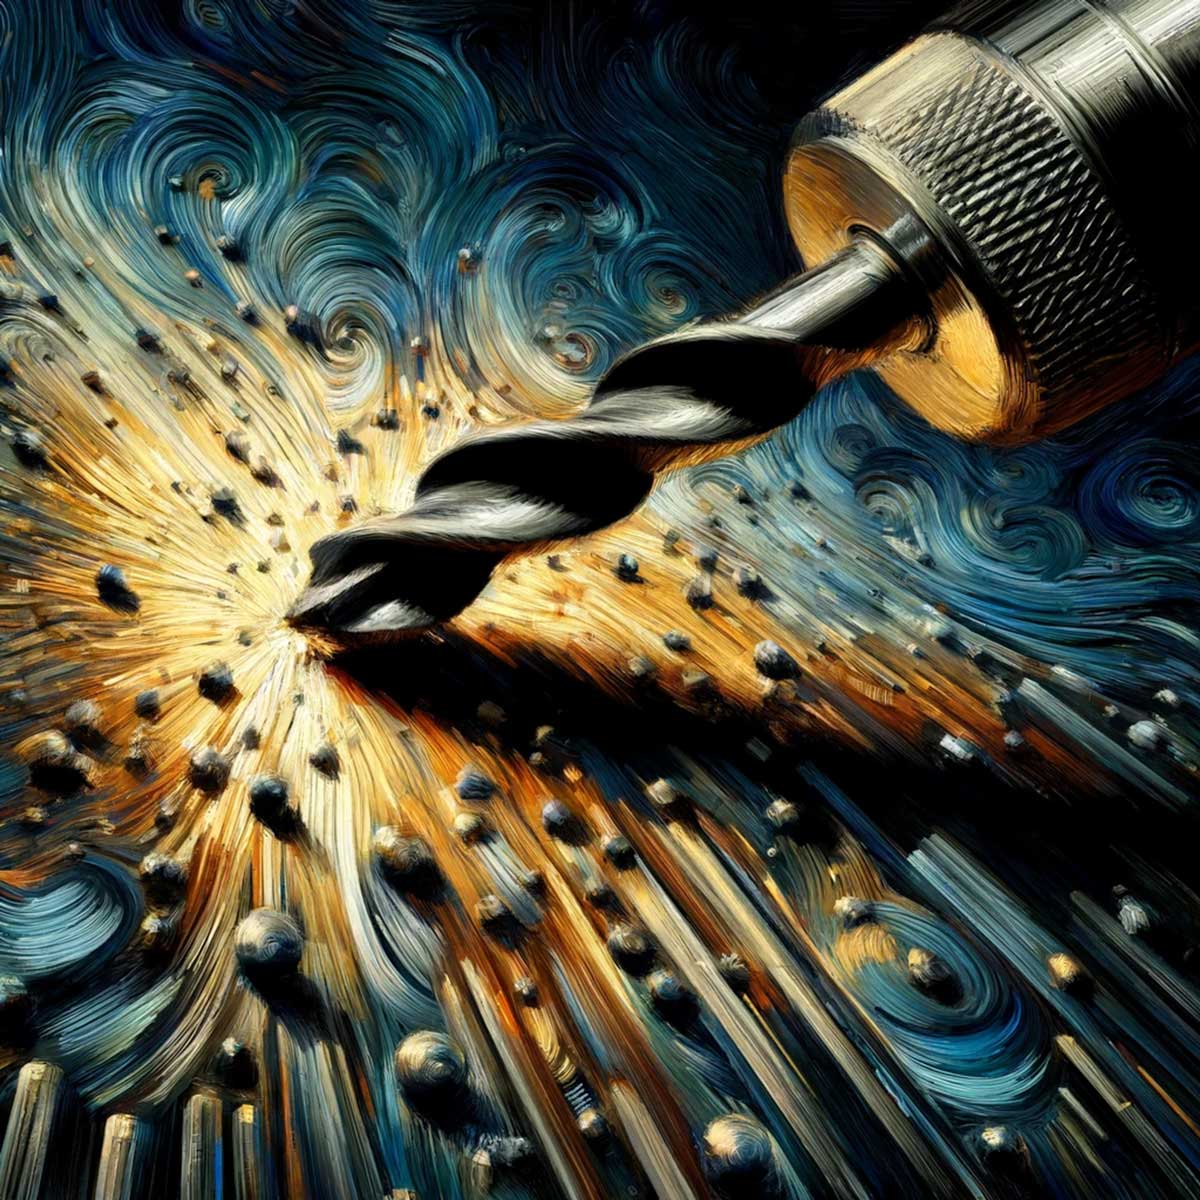 Artistic rendering of Friction Stir Welding with a swirling Van Gogh-inspired background.